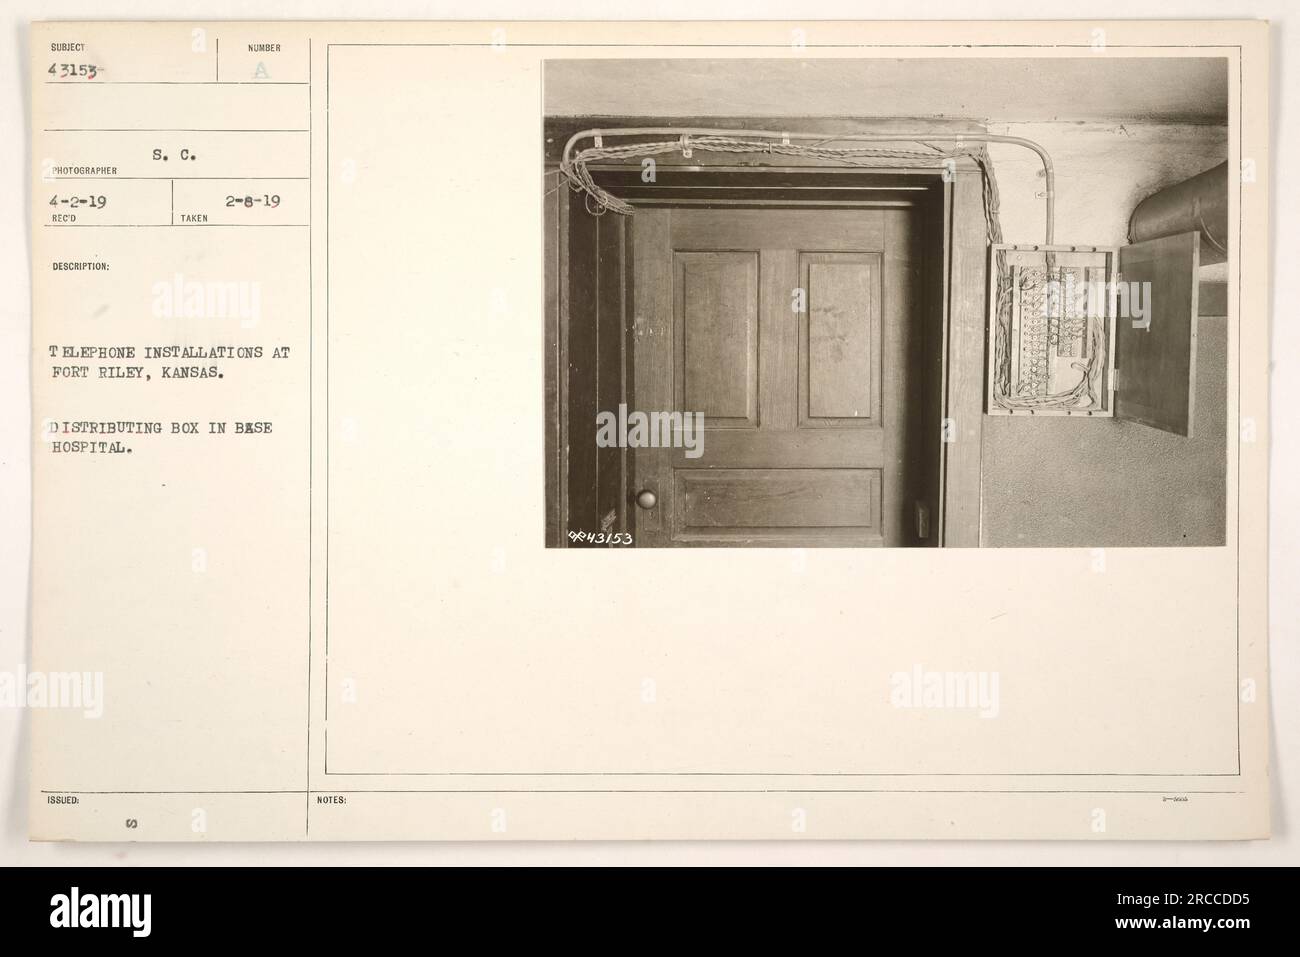 A photograph captured by S. C. Issled on February 8, 1919, at Fort Riley, Kansas. The image depicts the distribution box in the base hospital, showcasing one of the numerous telephone installations present at Fort Riley during World War One. (Image reference: 111-SC-43153) Stock Photo